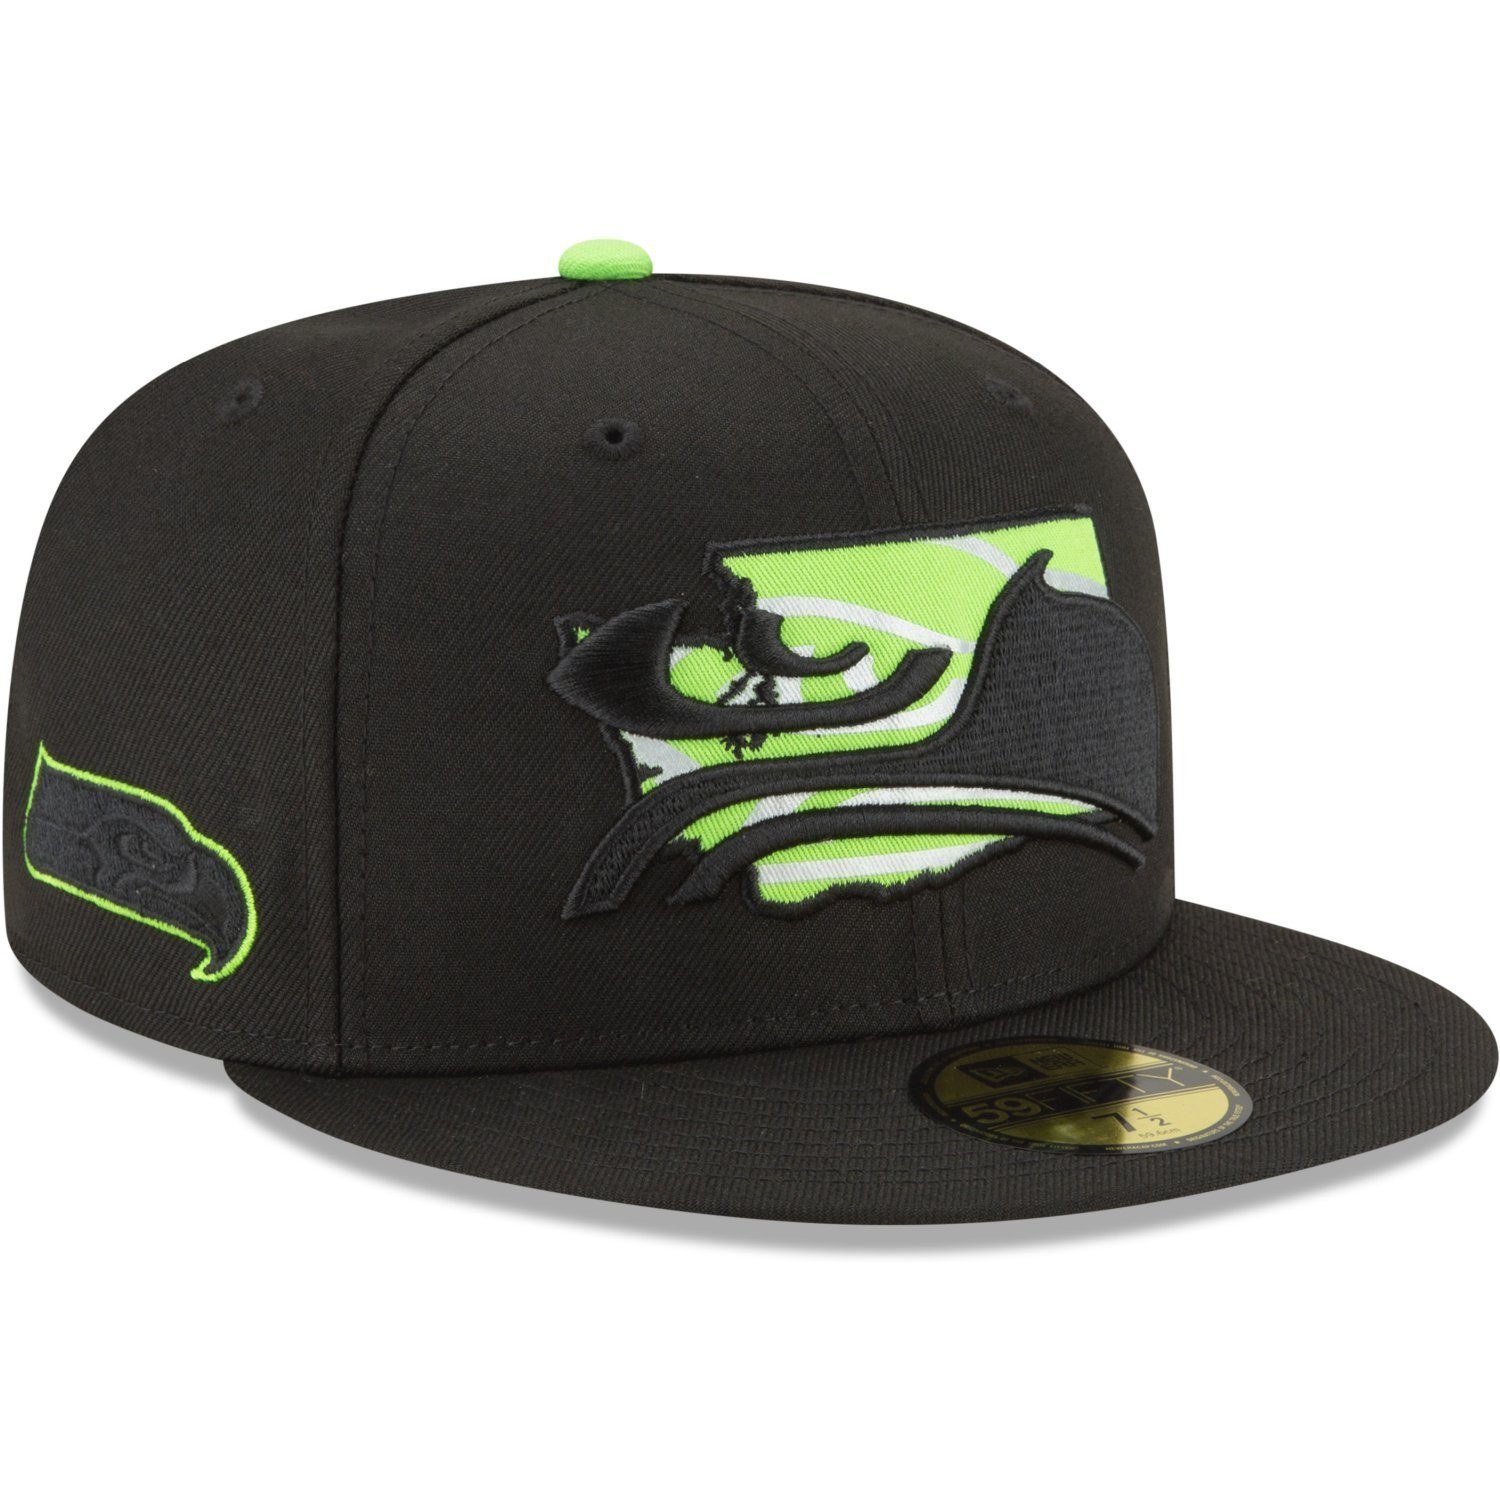 Seattle Cap 59Fifty Era Seahawks New LOGO STATE Teams Fitted NFL